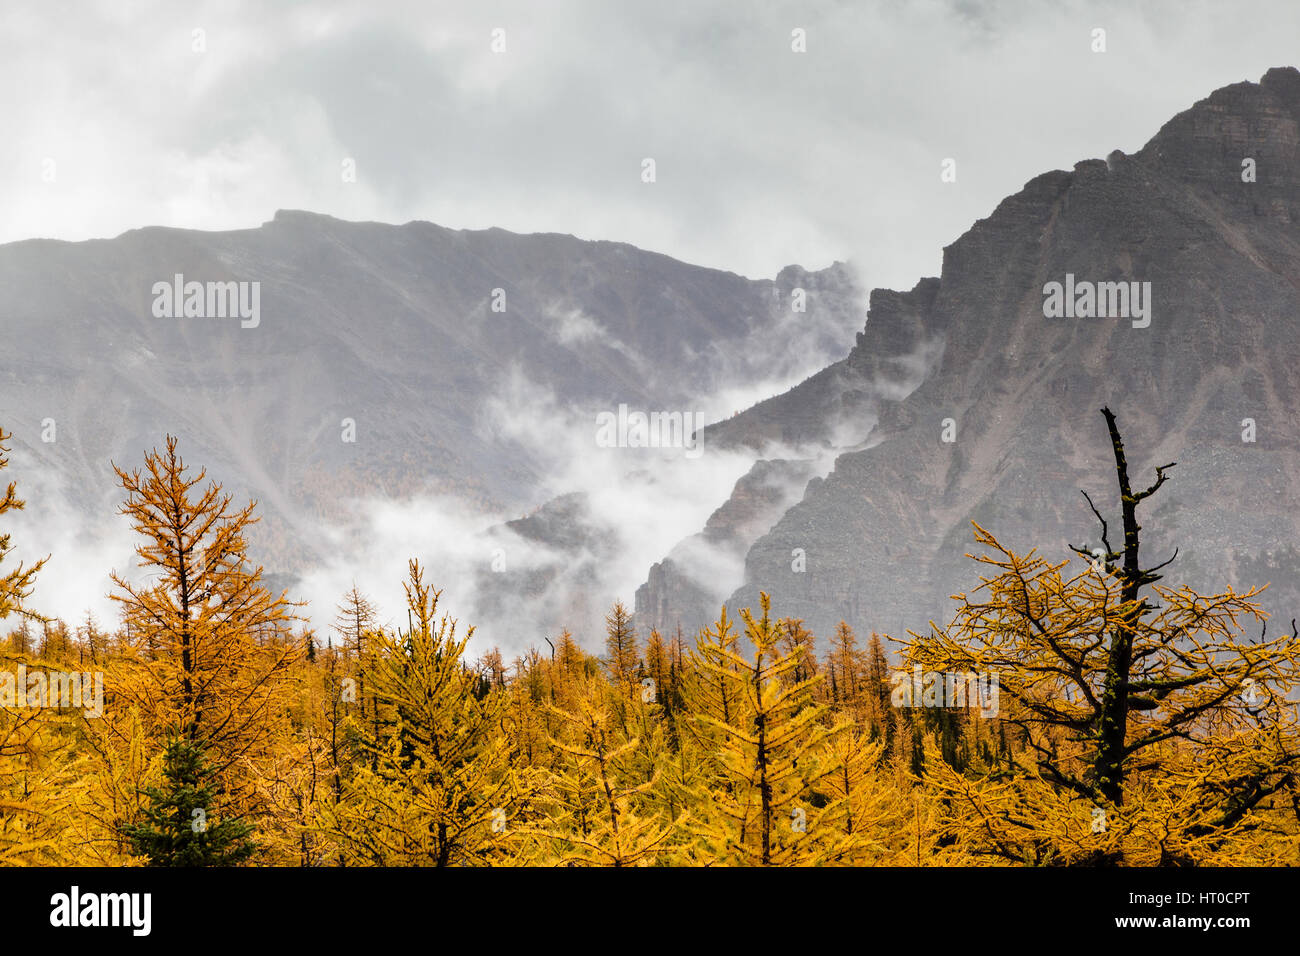 Golden larch trees dot the autumn landscape of Larch Valley near Lake Louise, Alberta, Canada, as fog surrounds the Valley of Ten Peaks in the backgro Stock Photo